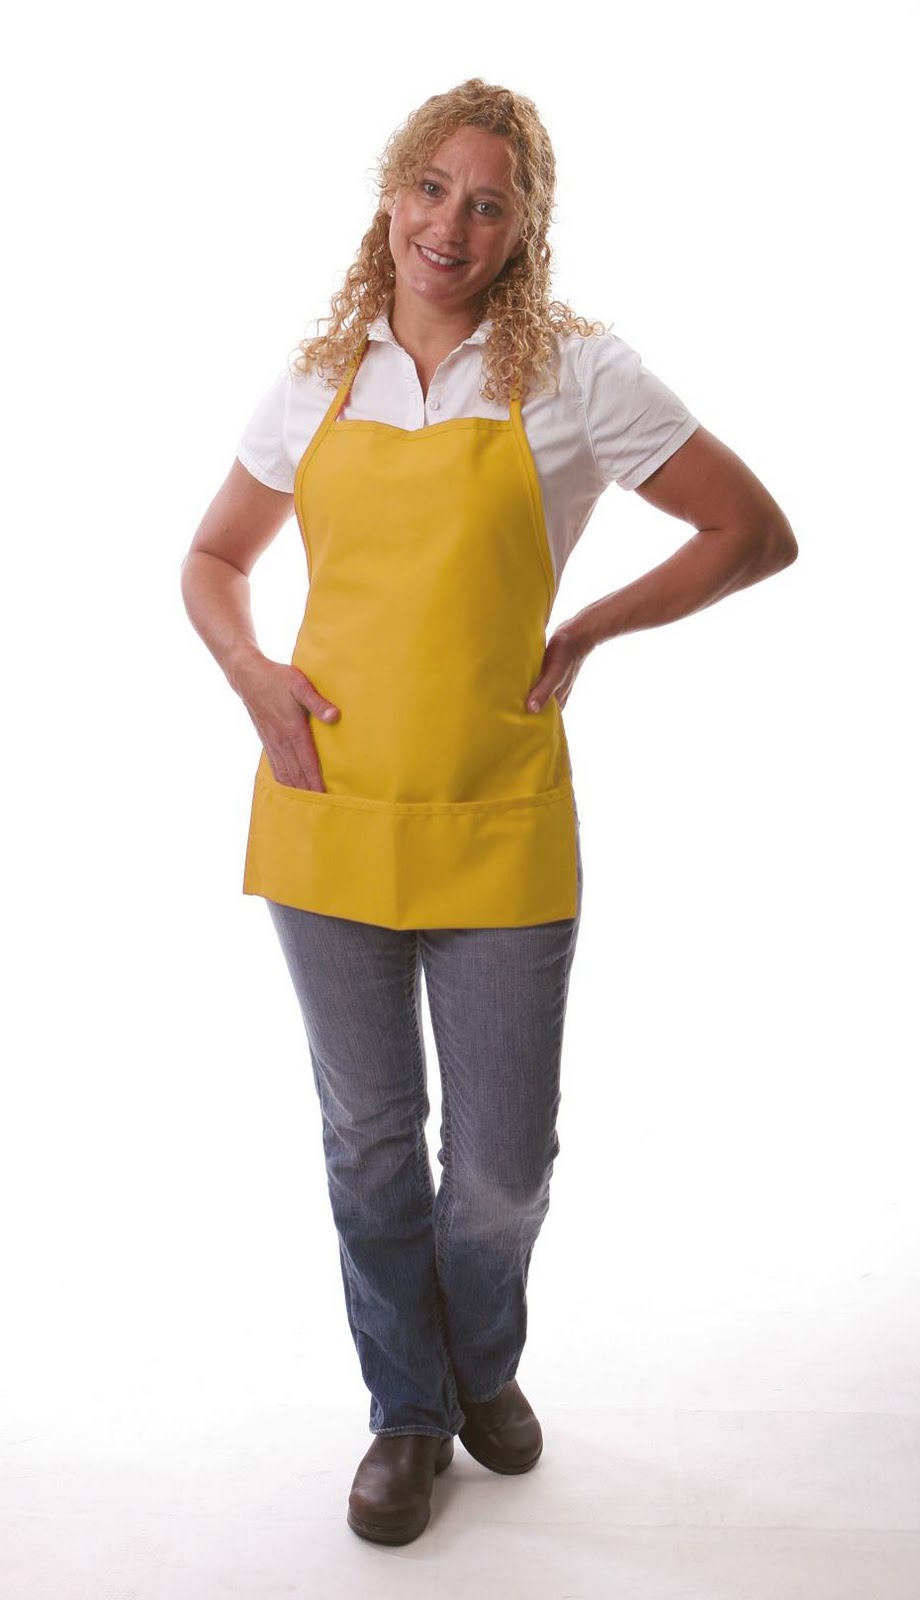 New Age Mama: Father's Day Gift Idea - Personalized Aprons from Aprons